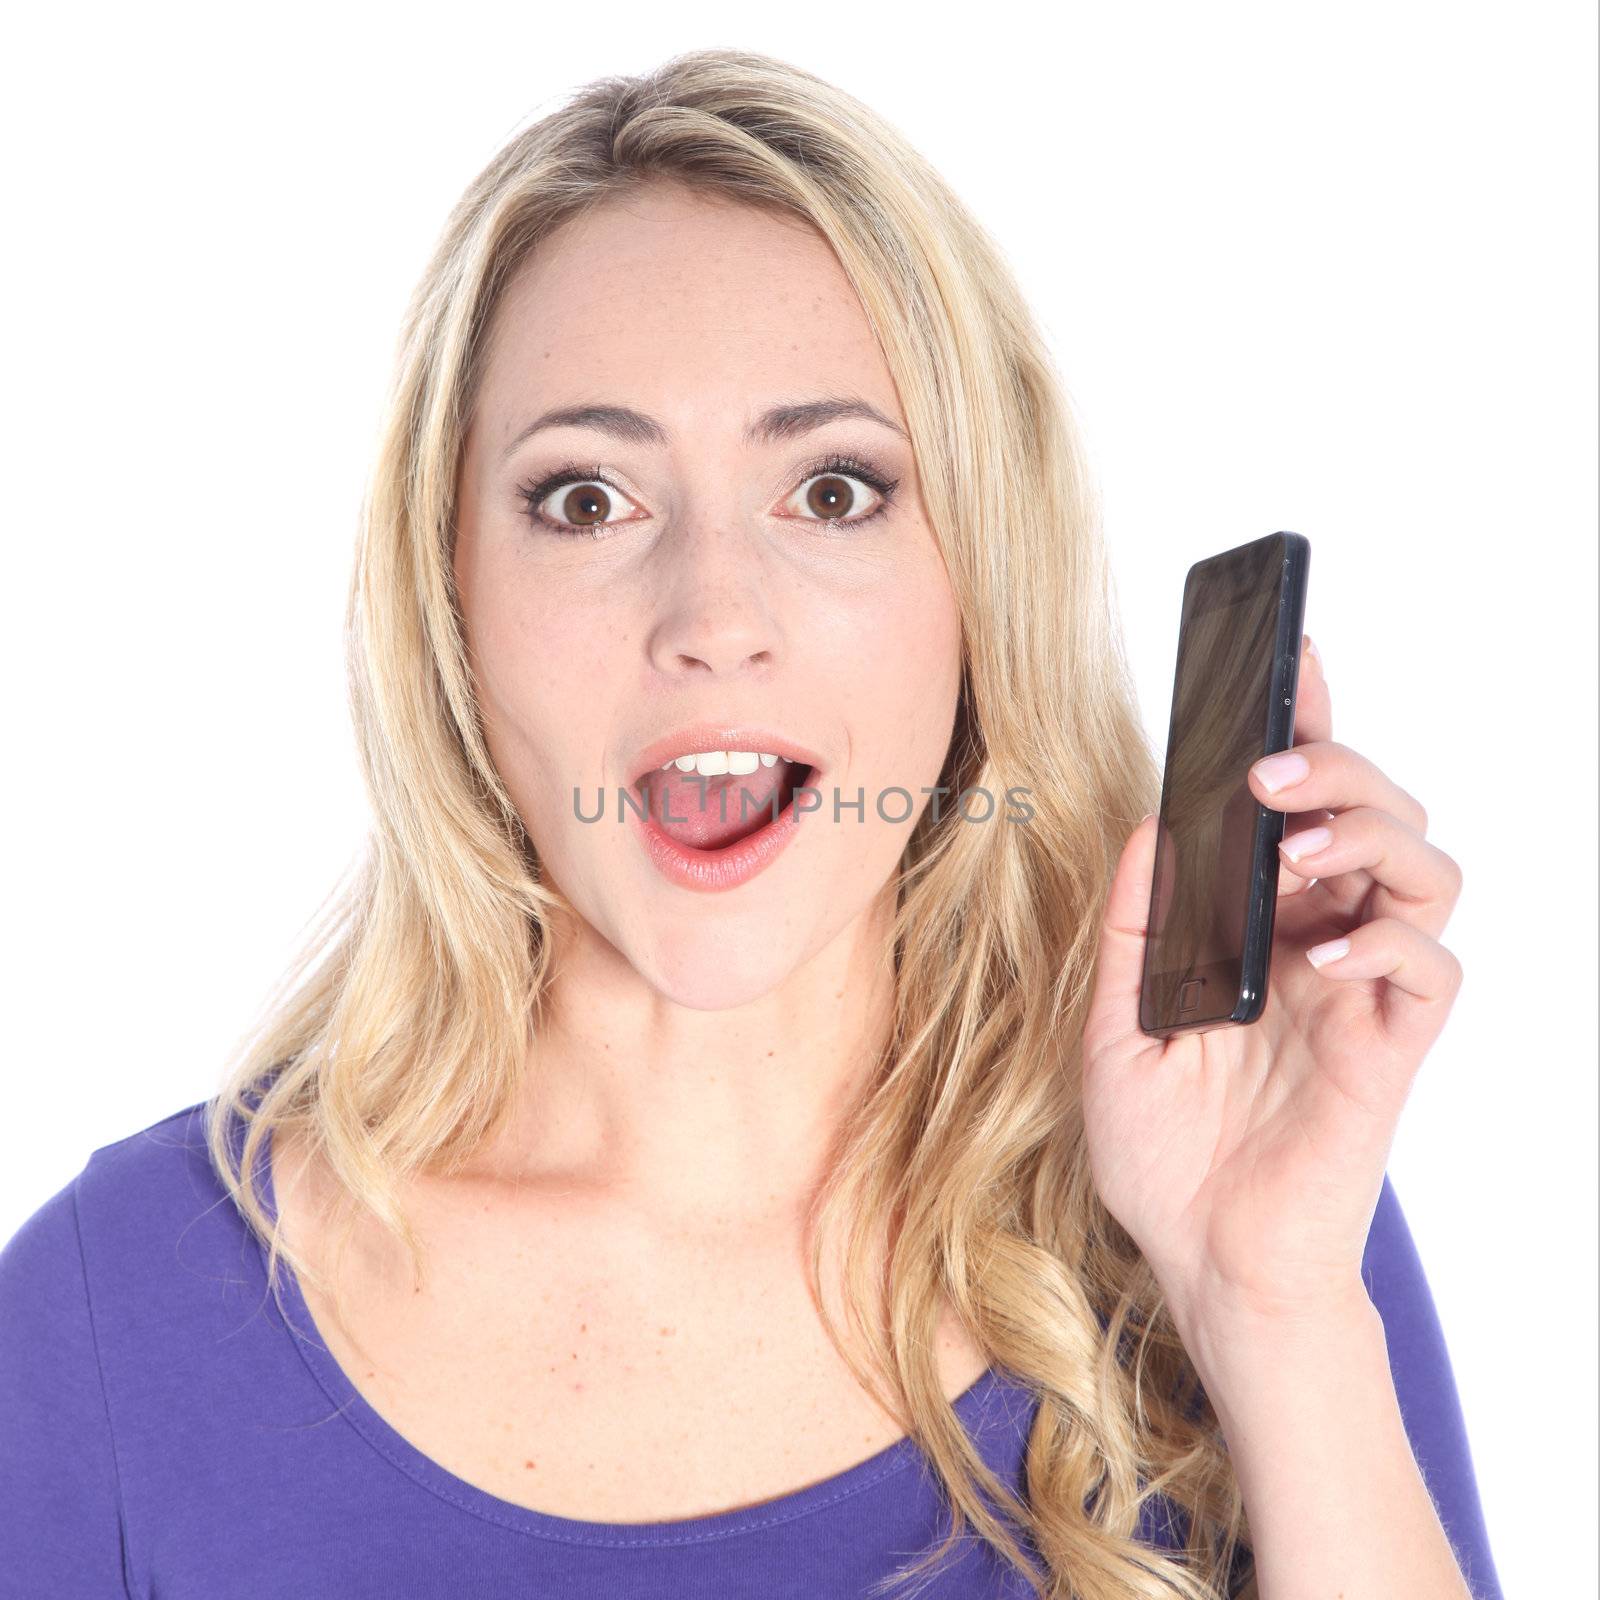 Surprised Young Blonde Woman Holding Cell Phone by Farina6000